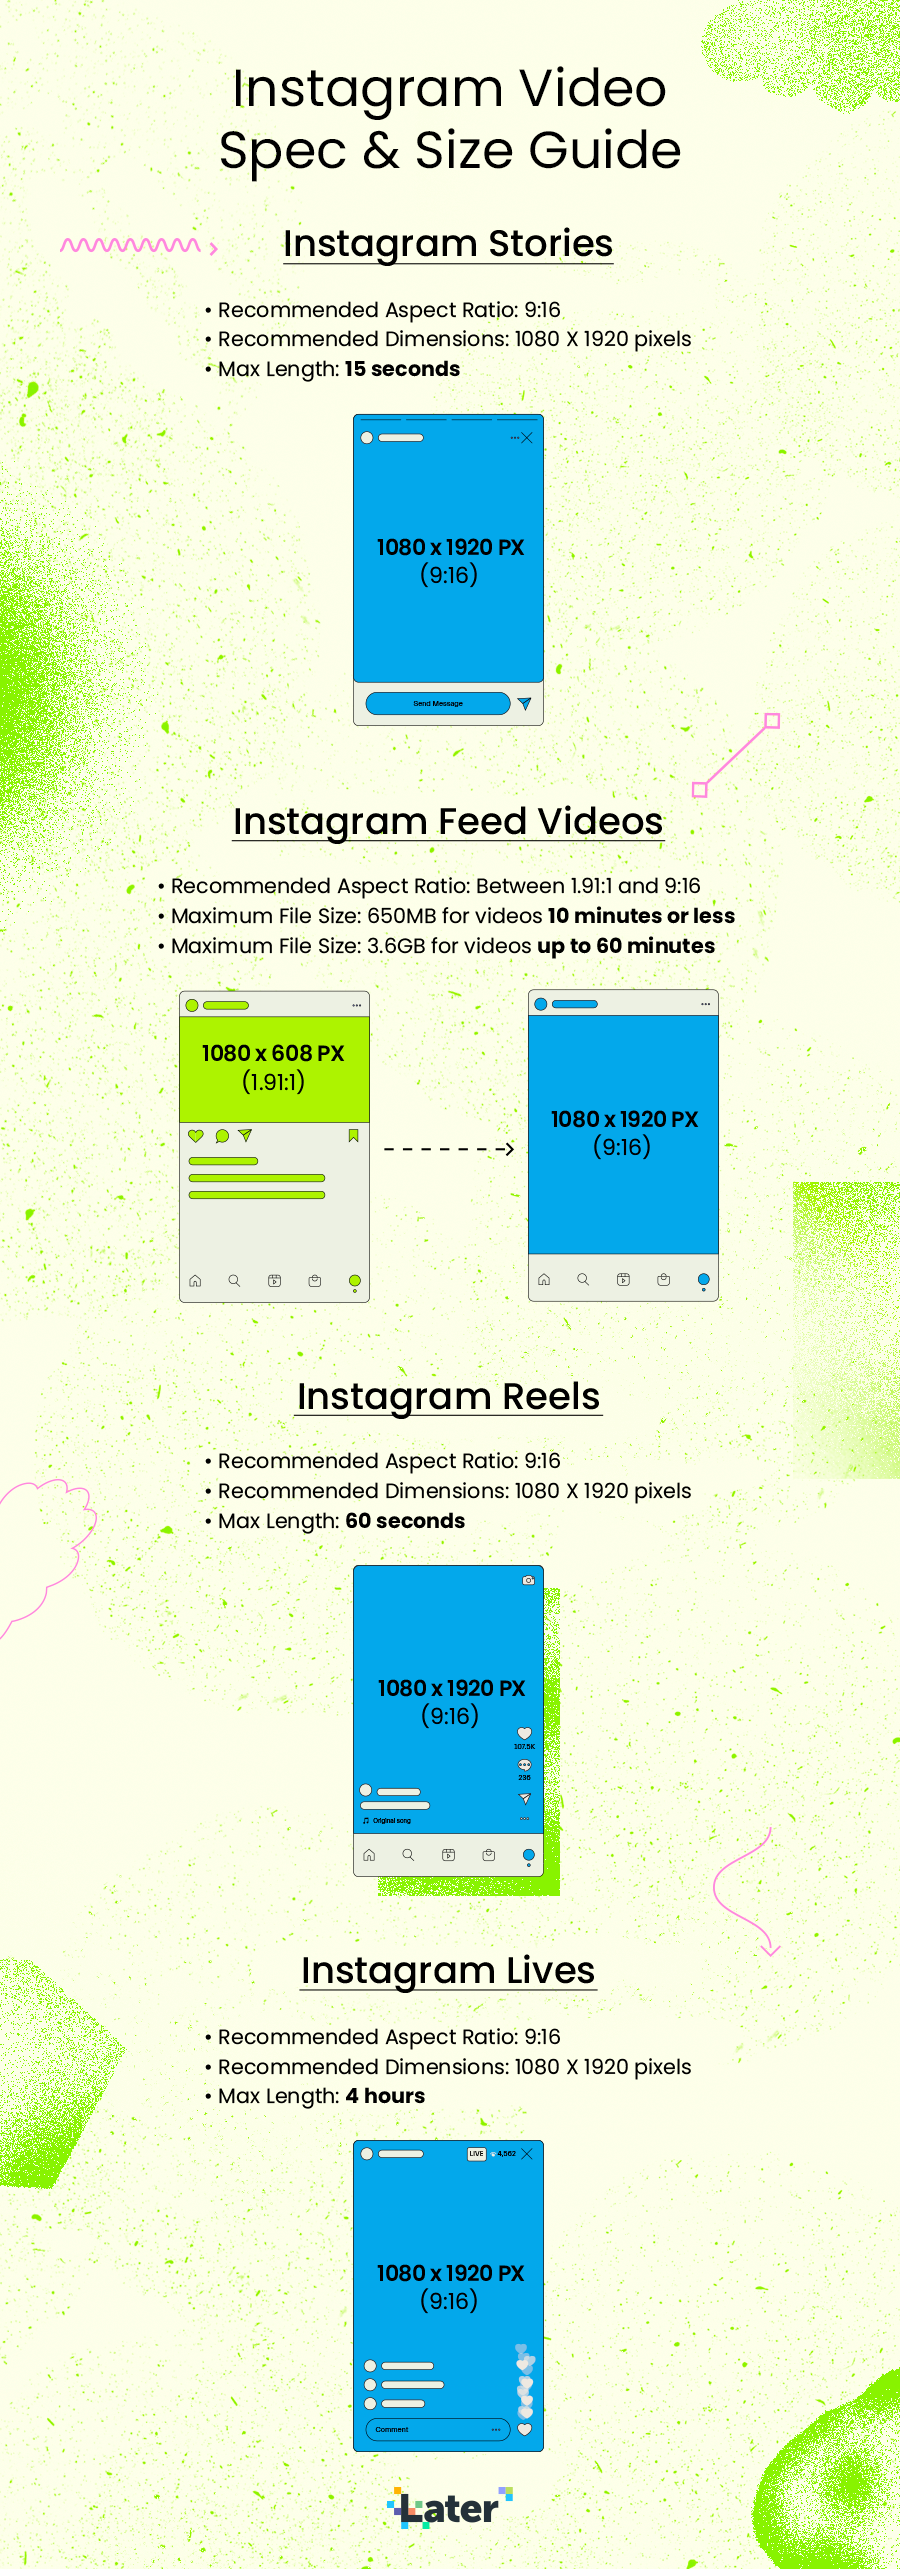 an infographic of specs and sizes for each Instagram video format